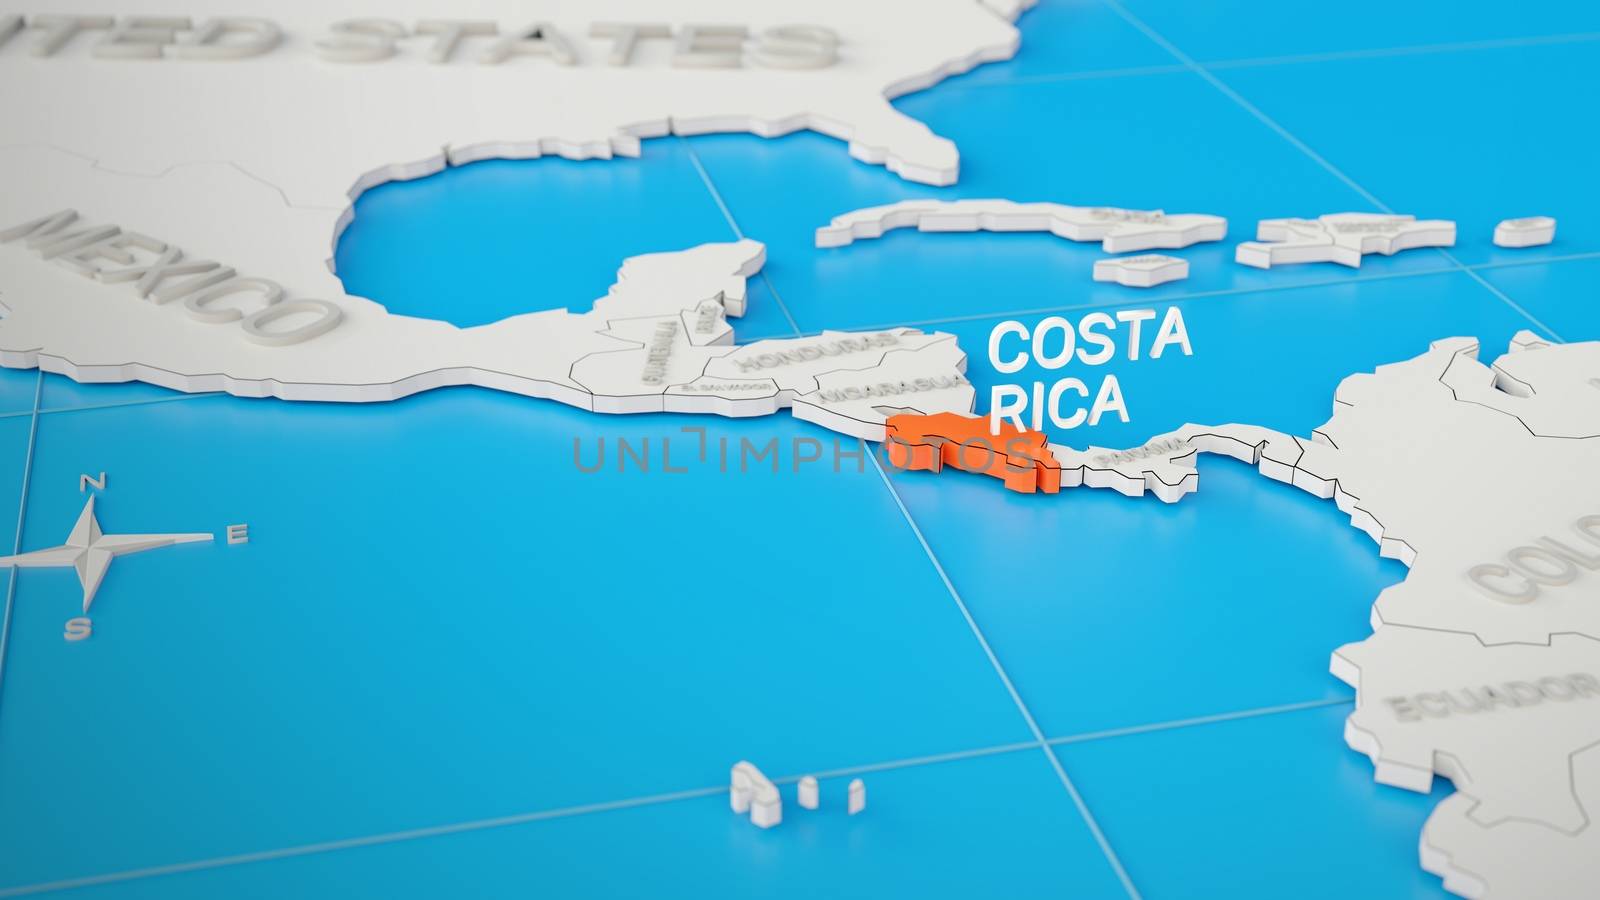 Costa Rica highlighted on a white simplified 3D world map. Digit by hernan_hyper